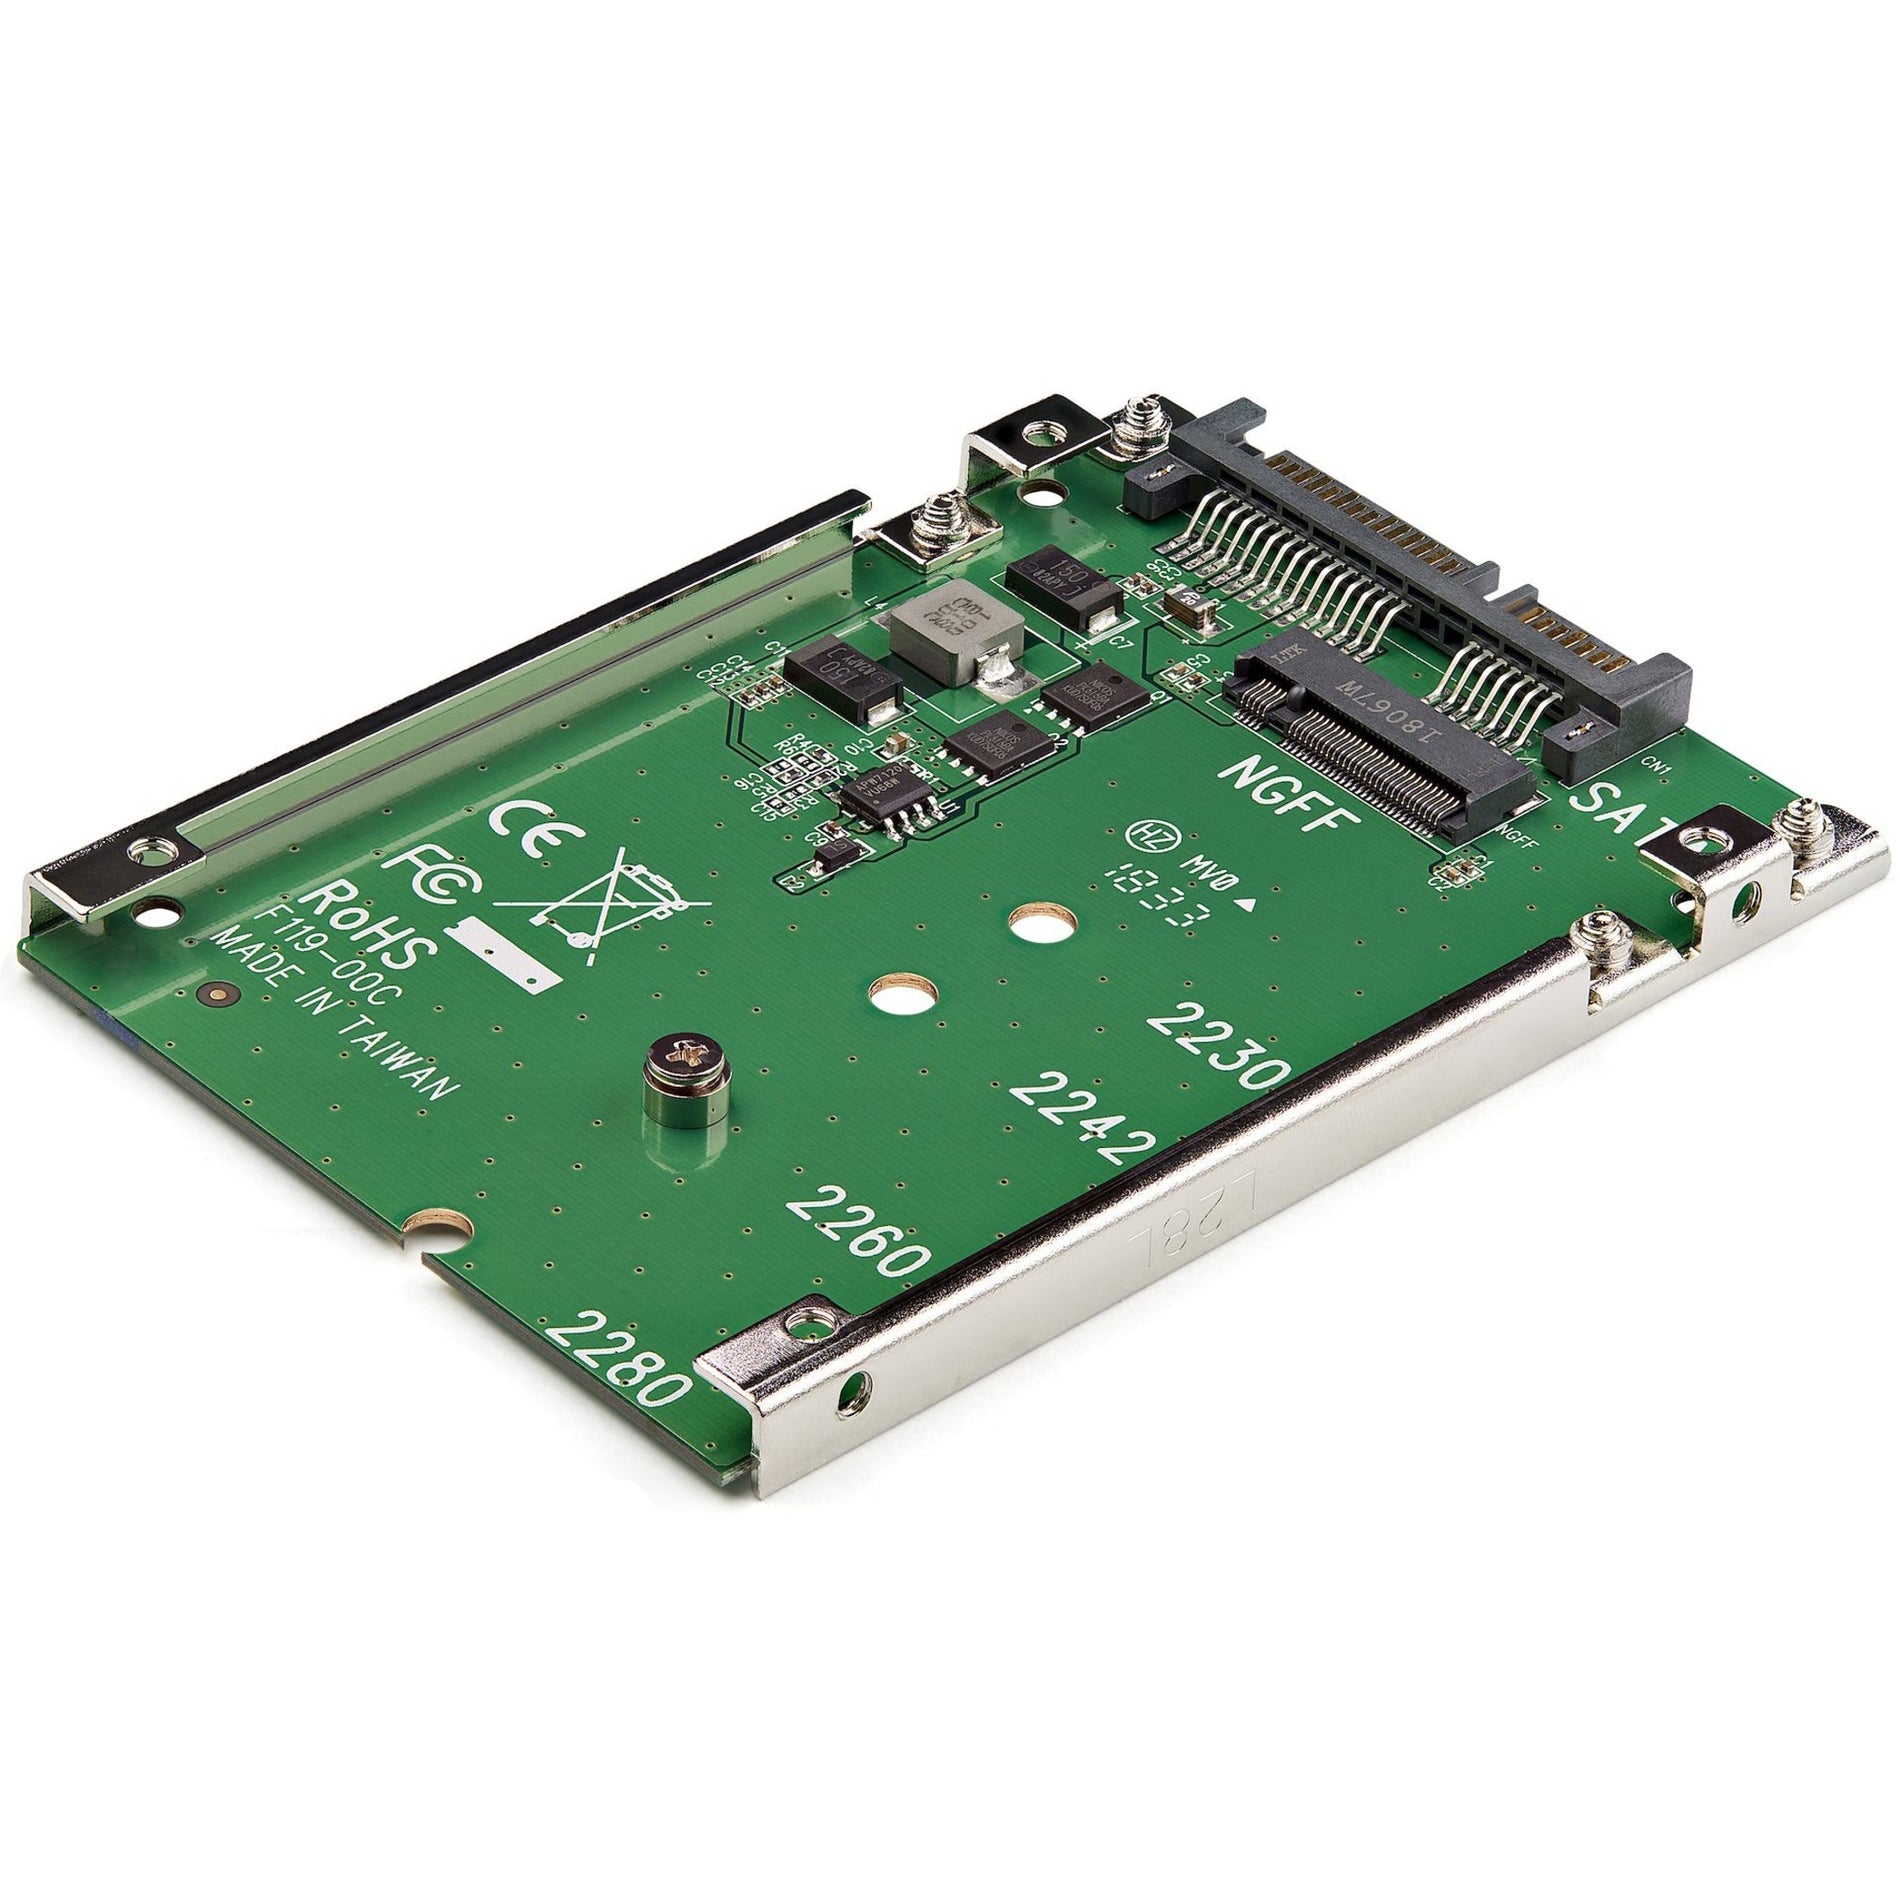 StarTech.com SAT32M225 M.2 NGFF SSD to 2.5in SATA SSD Converter, Easy SSD Installation & Compatibility